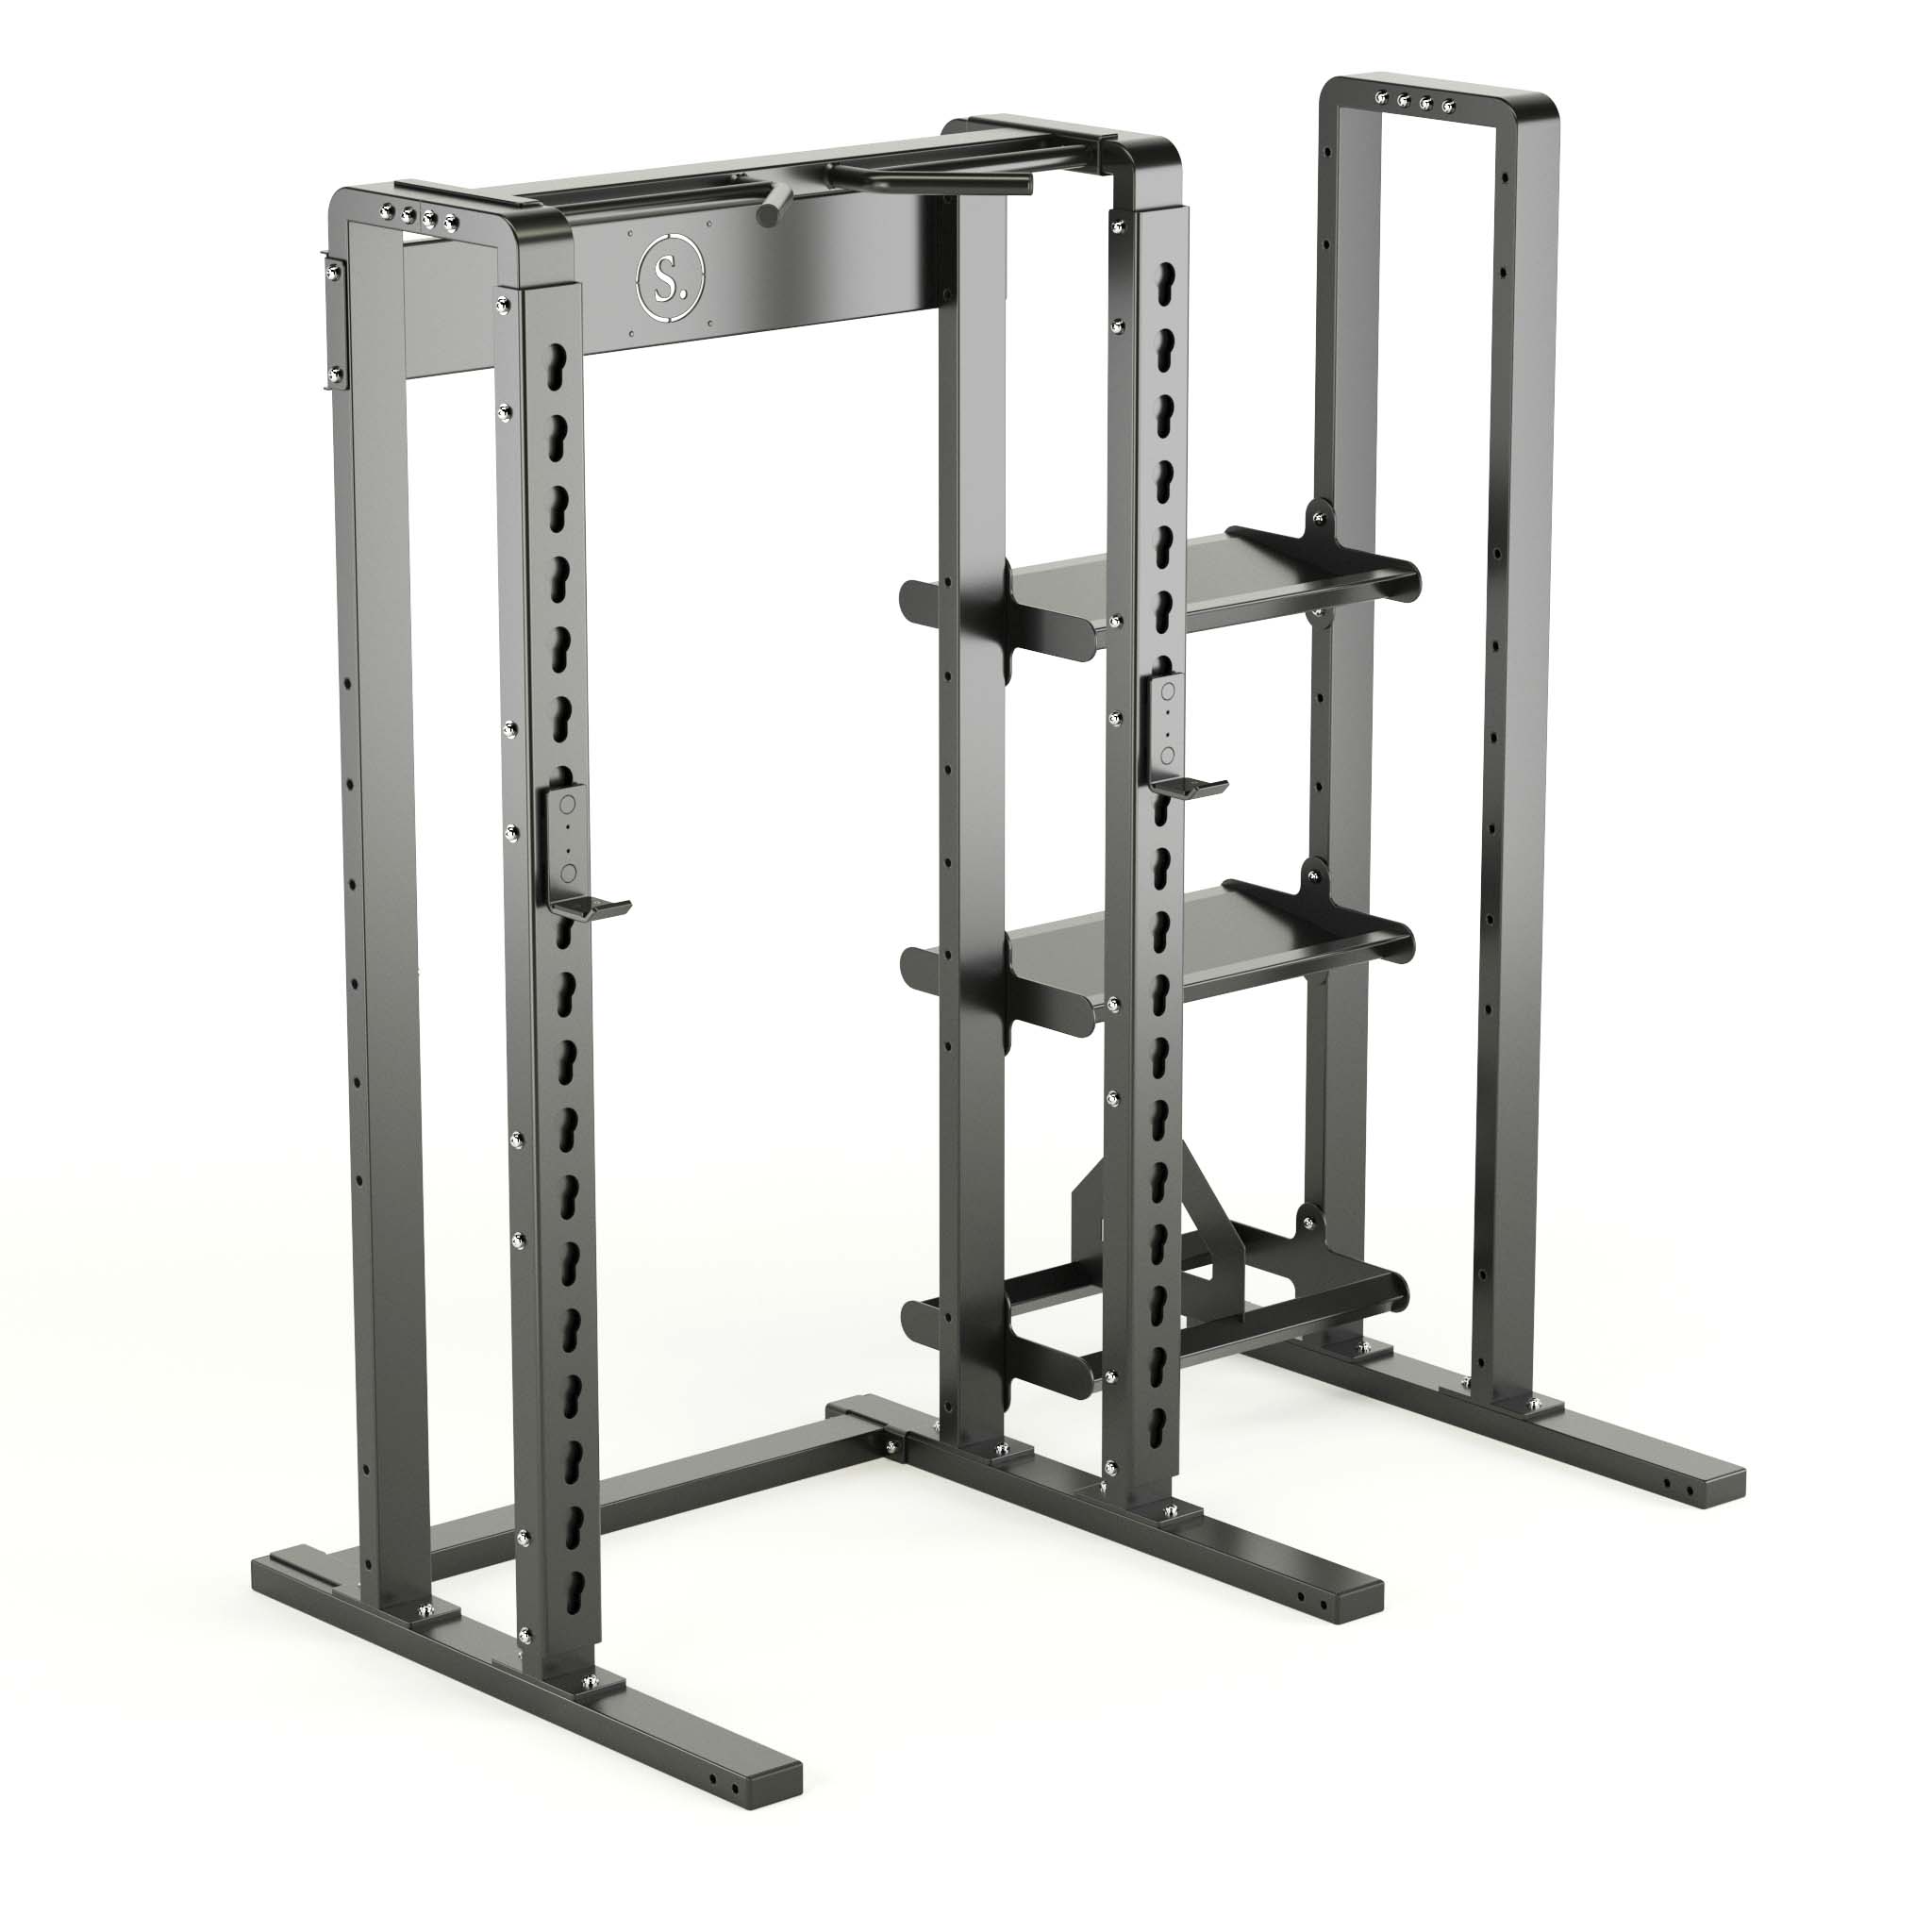 Solo half rack with compact storage in black